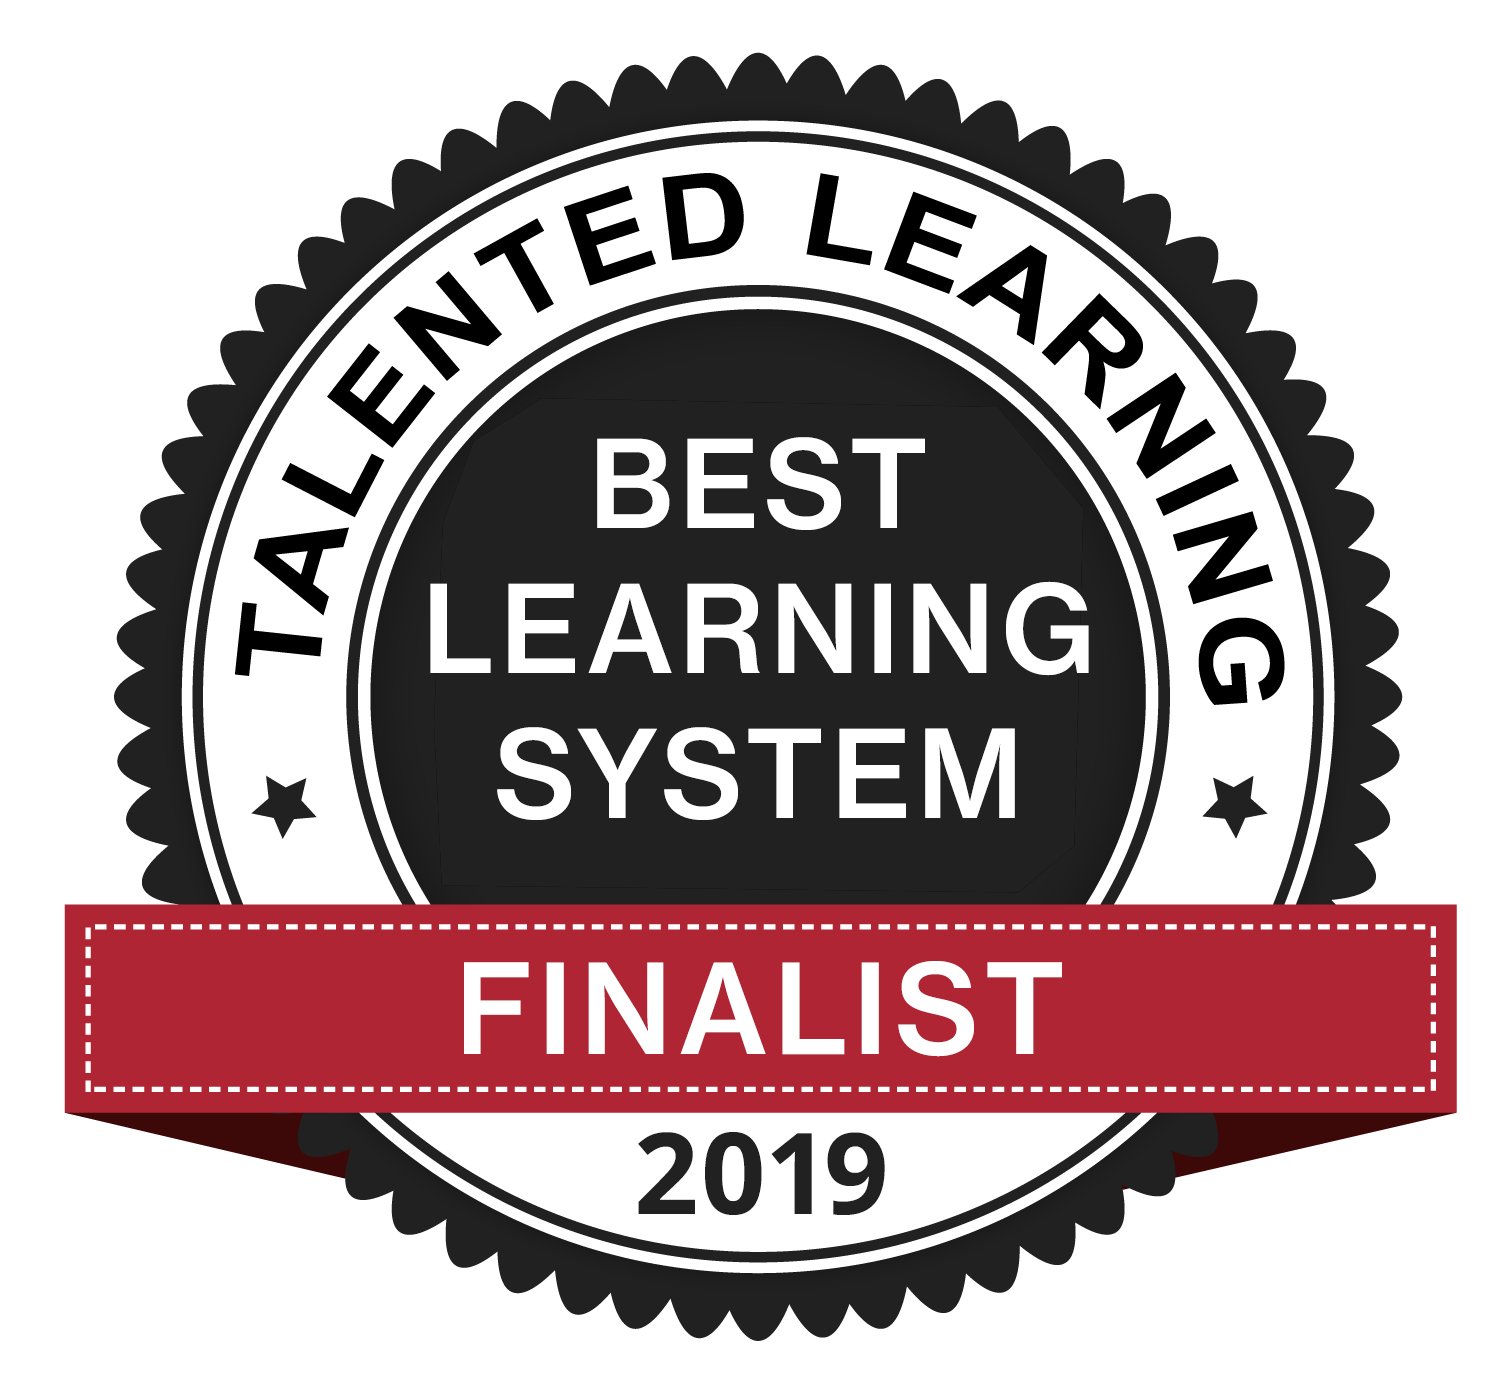 eLogic Learning received the best learning system finalist award from Talented Learning in the category of Continuing Education.